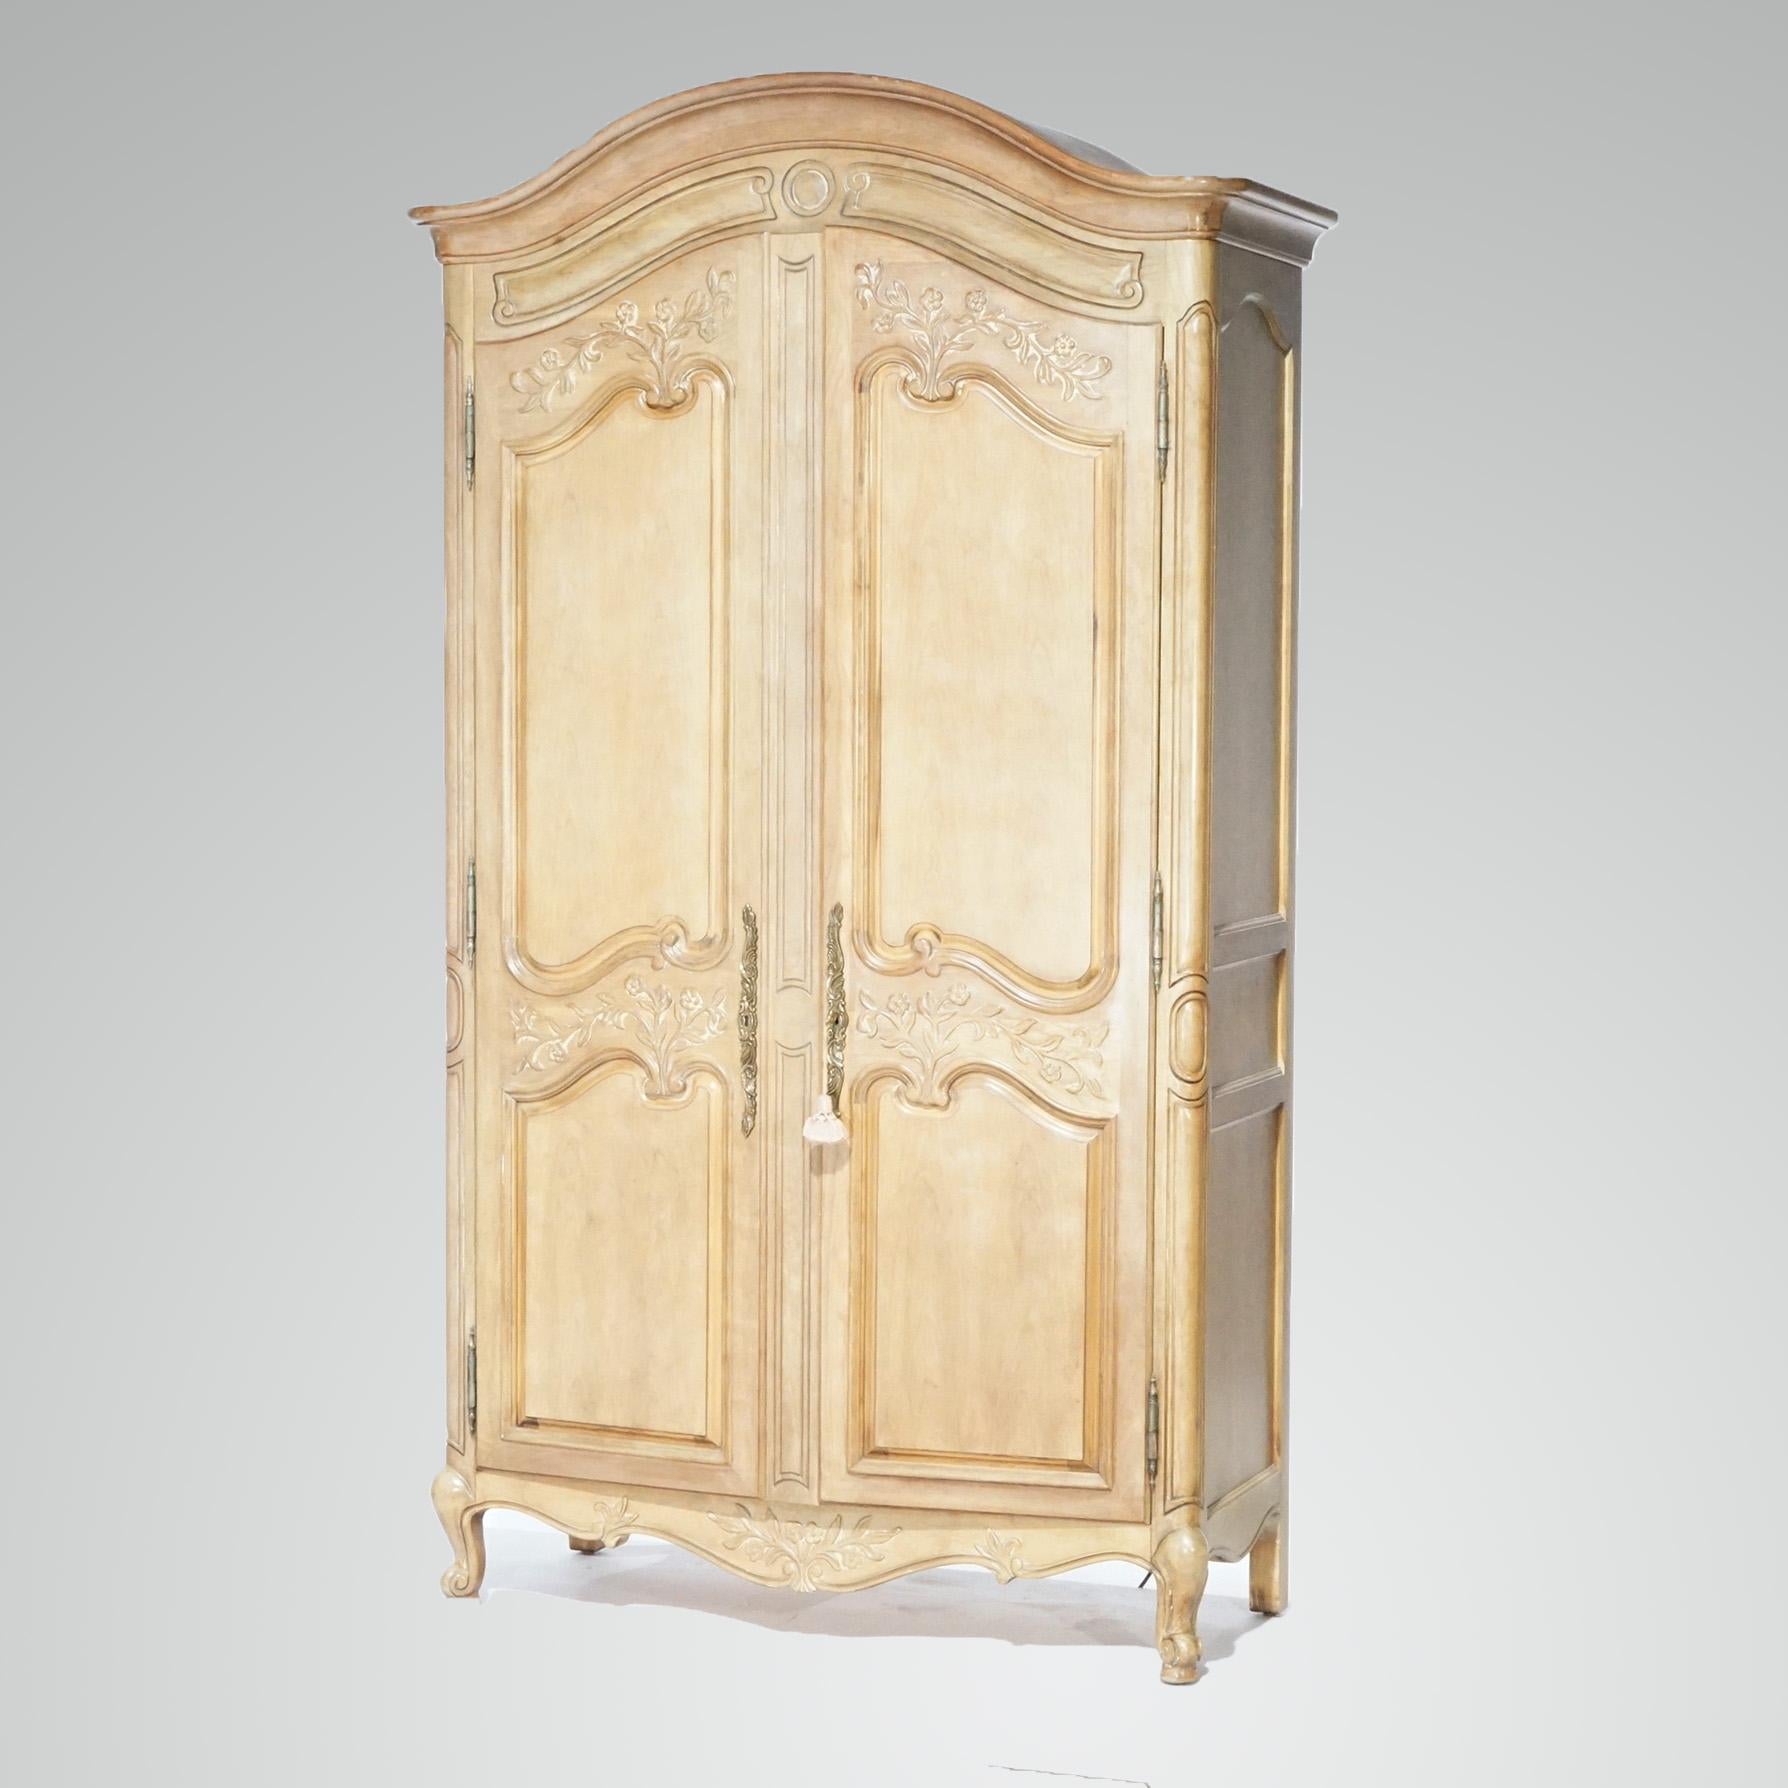 A French Louis XV style armoire by White Furniture offers satinwood construction with arched top over raised panel case having double doors opening to storage interior, raised on cabriole legs, maker mark as photographed, 20th century

Measures -